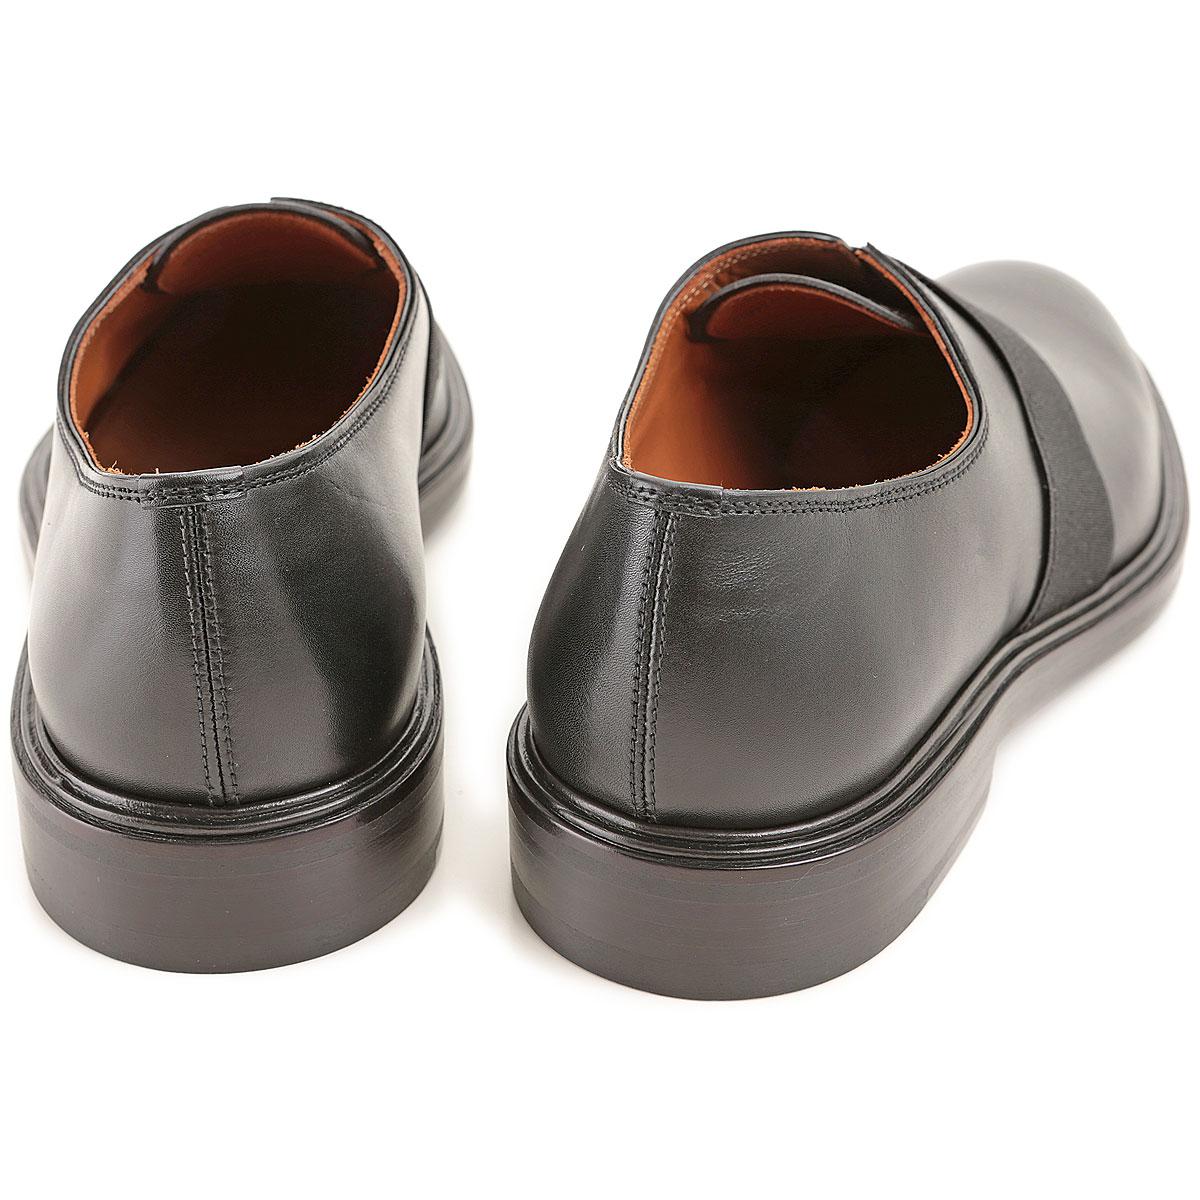 Givenchy Loafers For Men On Sale in Black for Men - Lyst